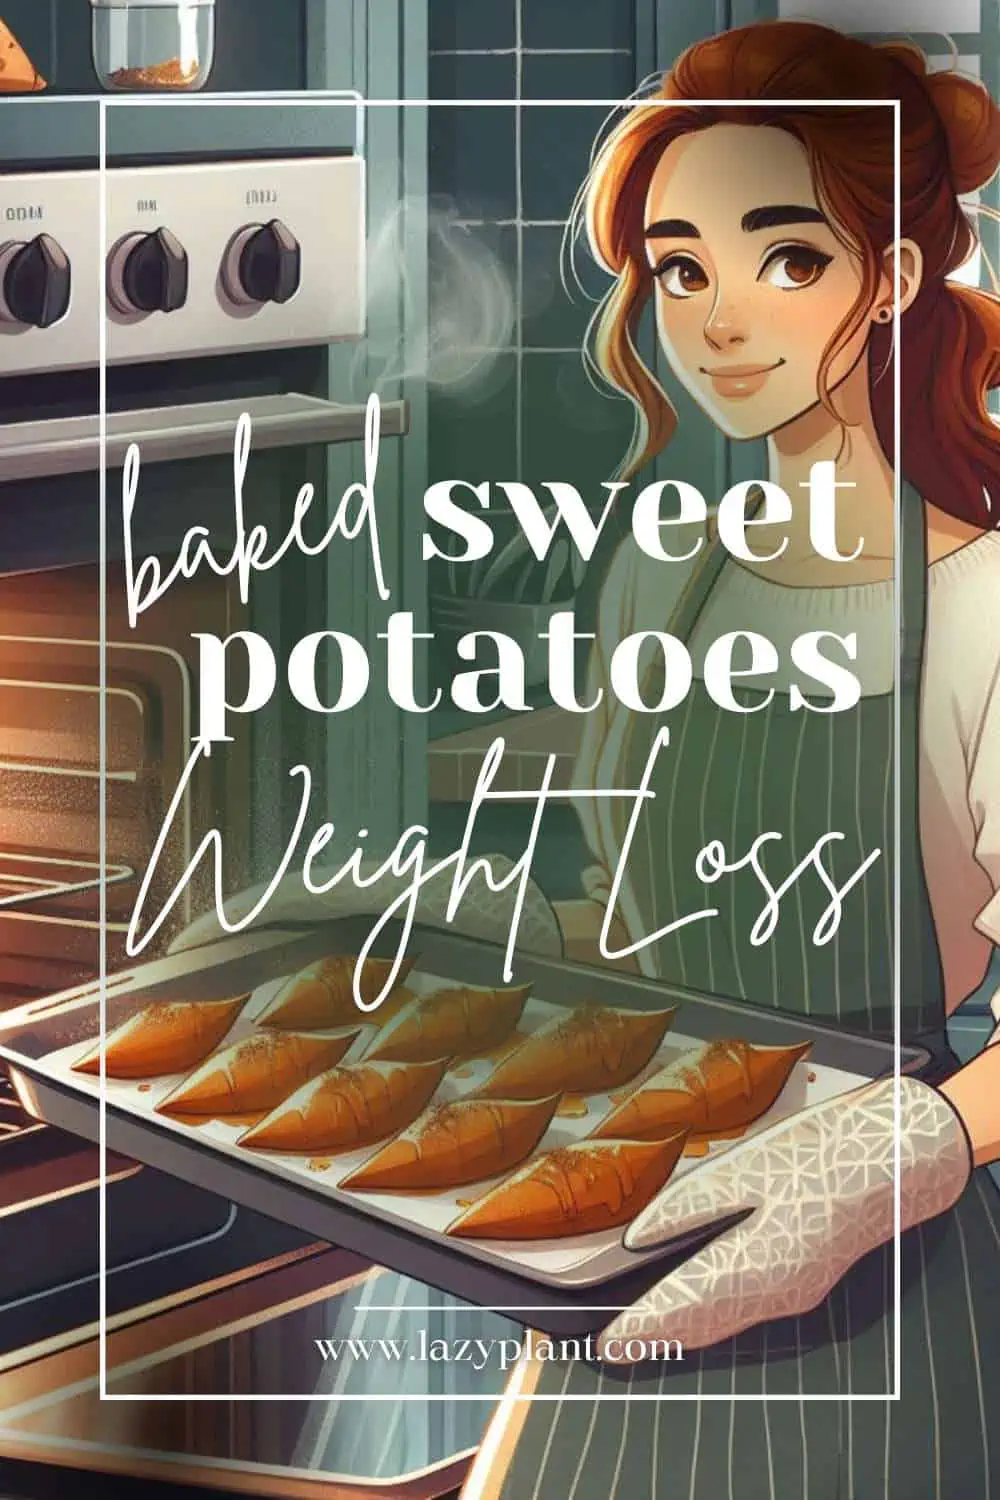 Baked, boiled & air-fried sweet potatoes are good for Weight Loss.